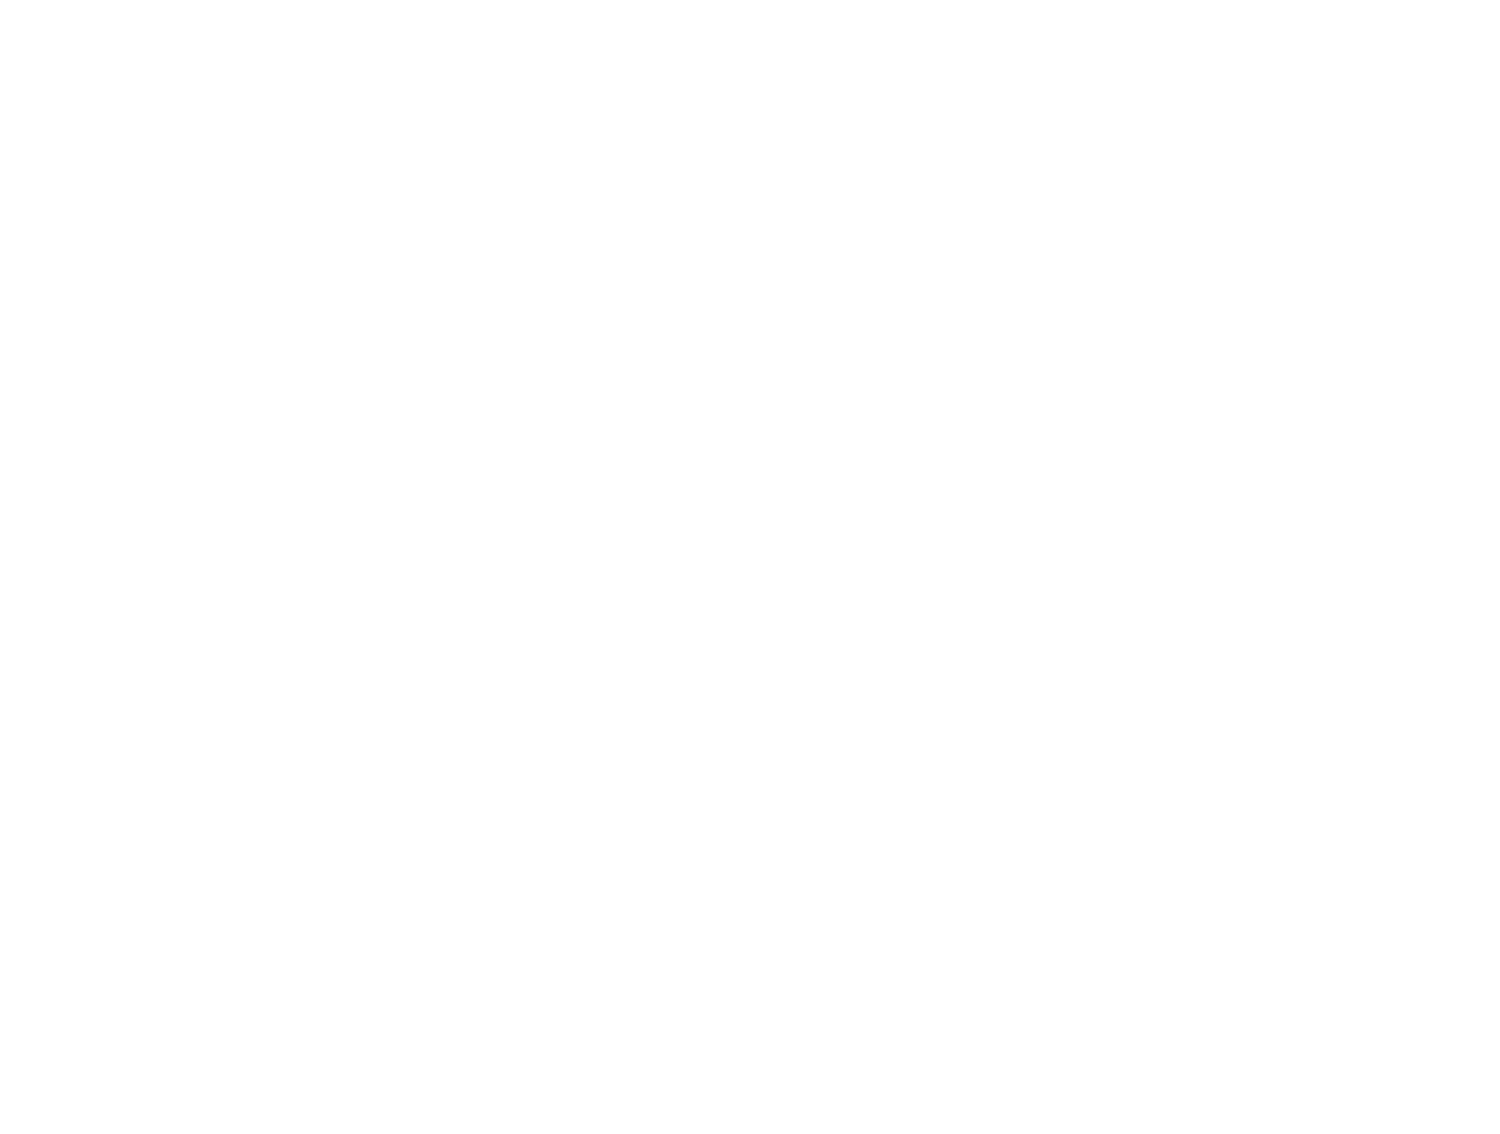 decking fitted around you